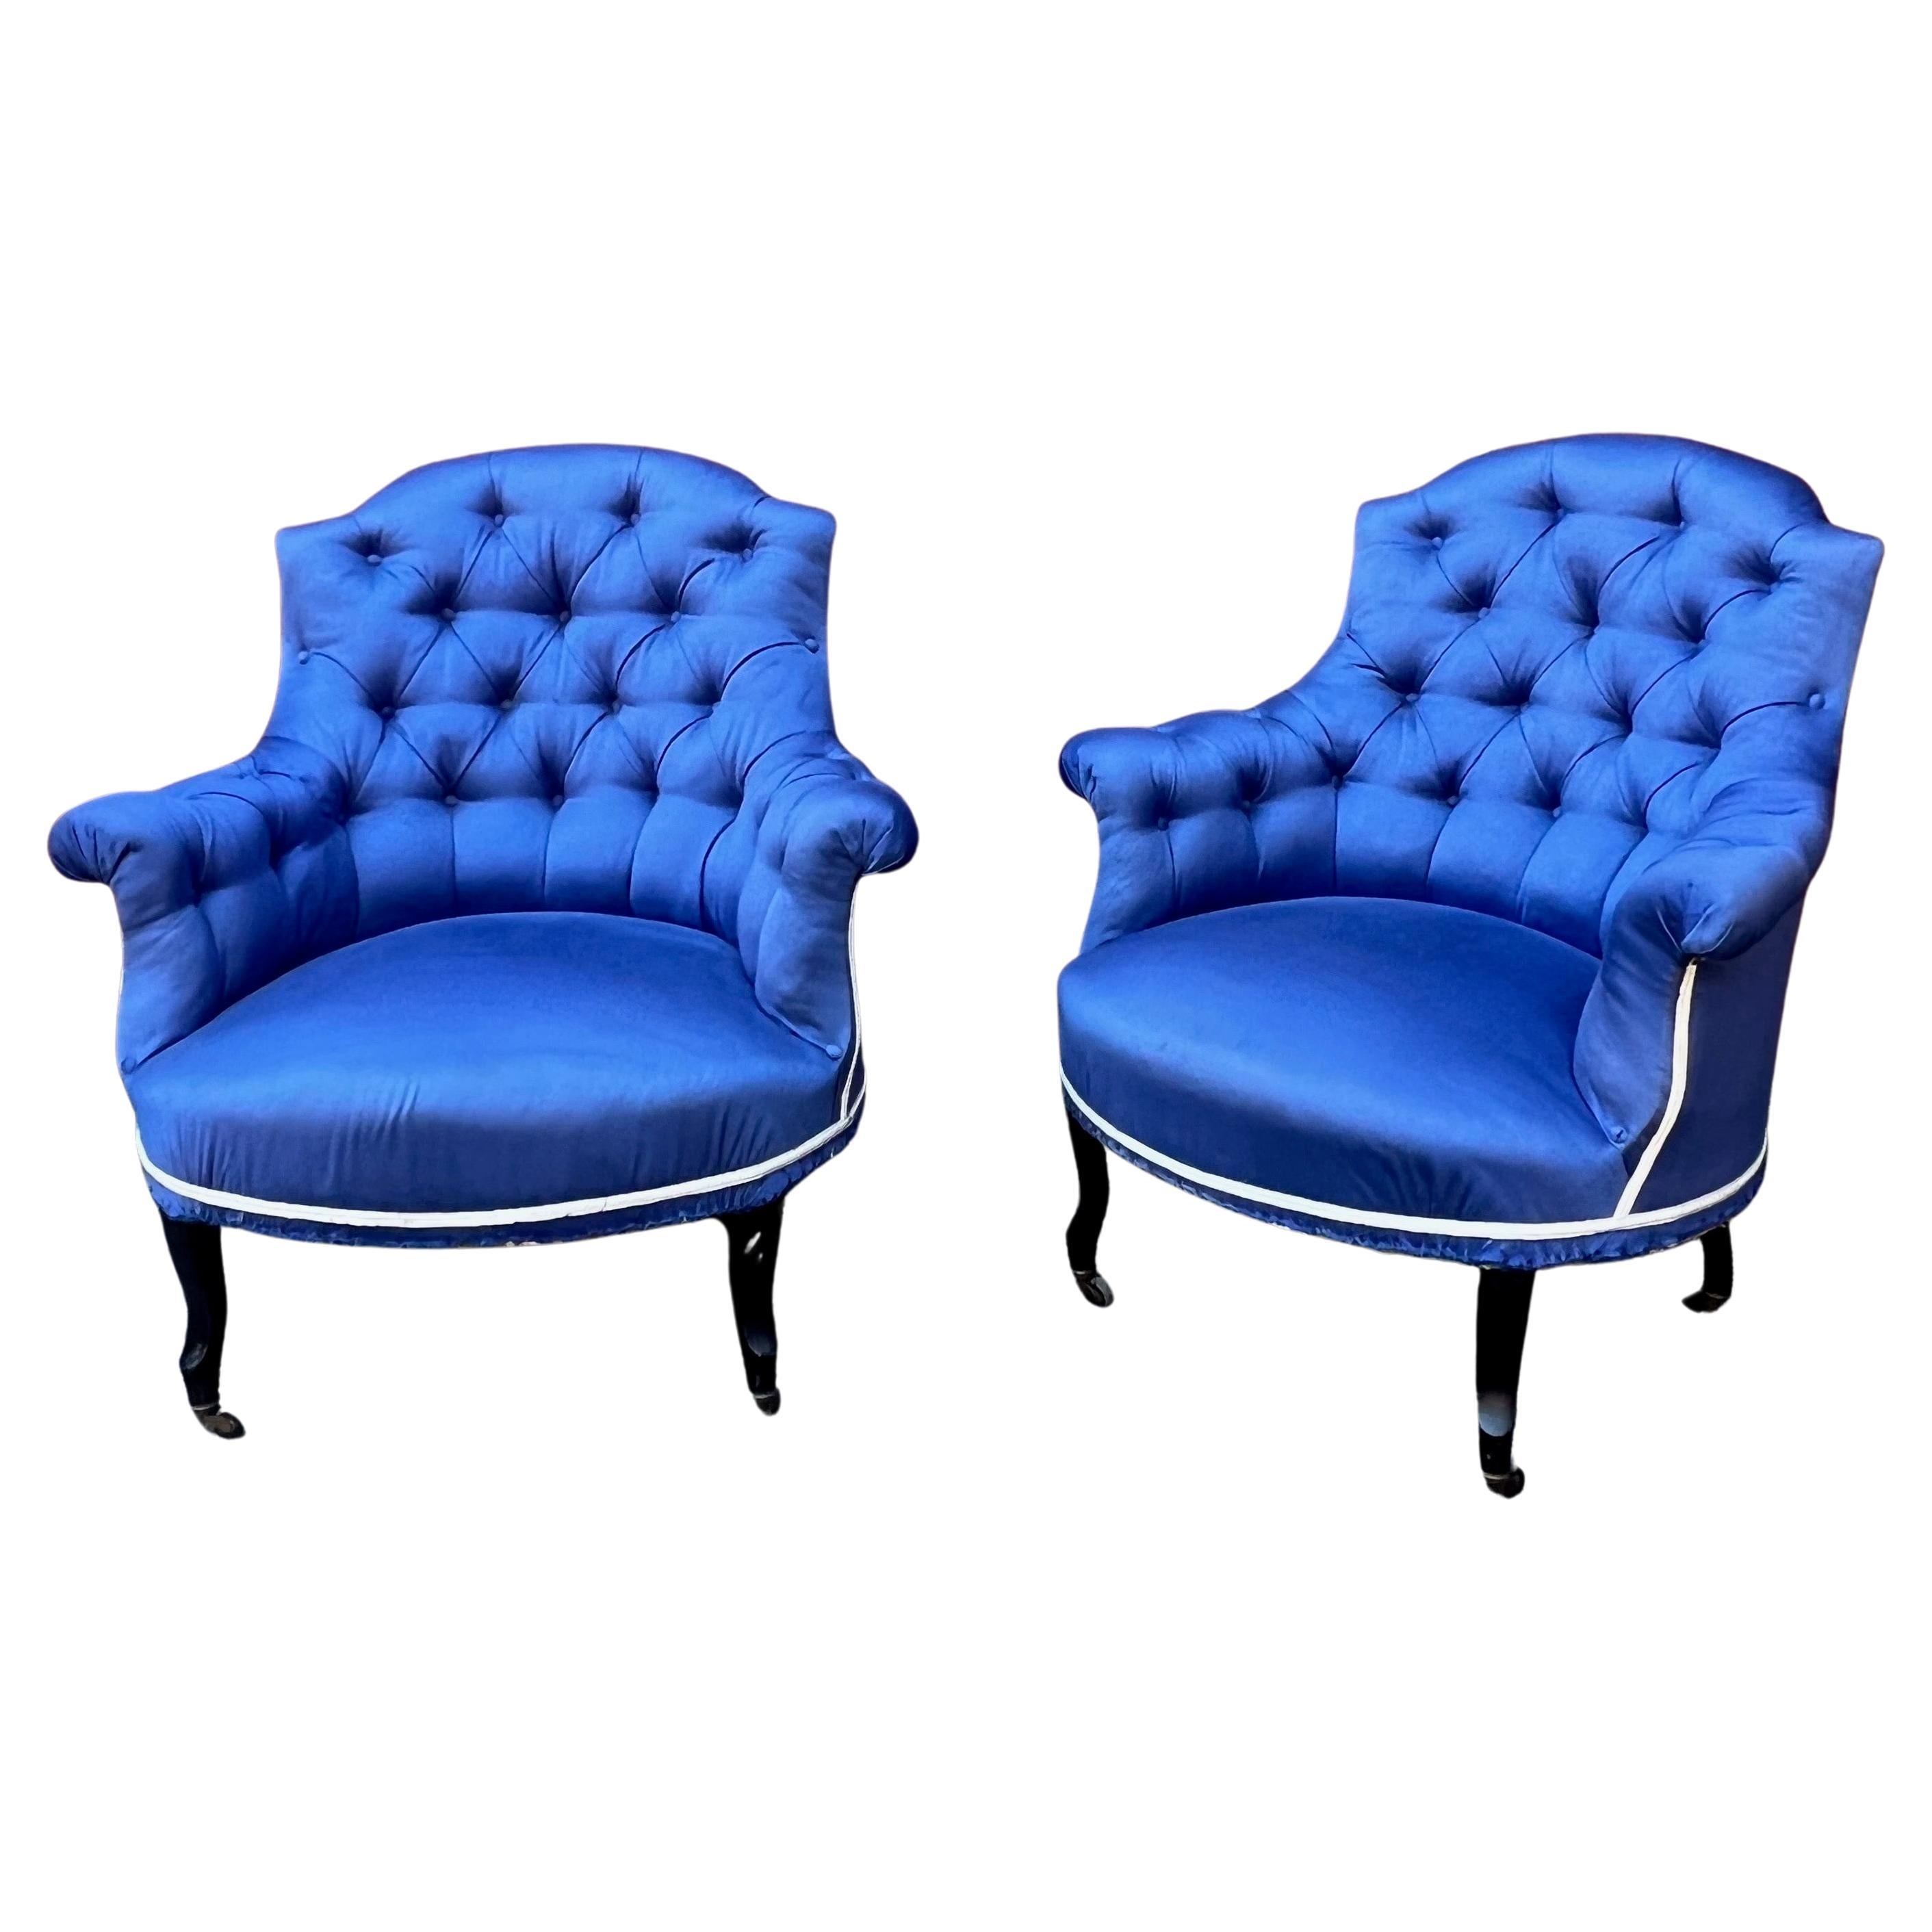 Pair of French Napoleon III Blue Tufted Armchairs For Sale